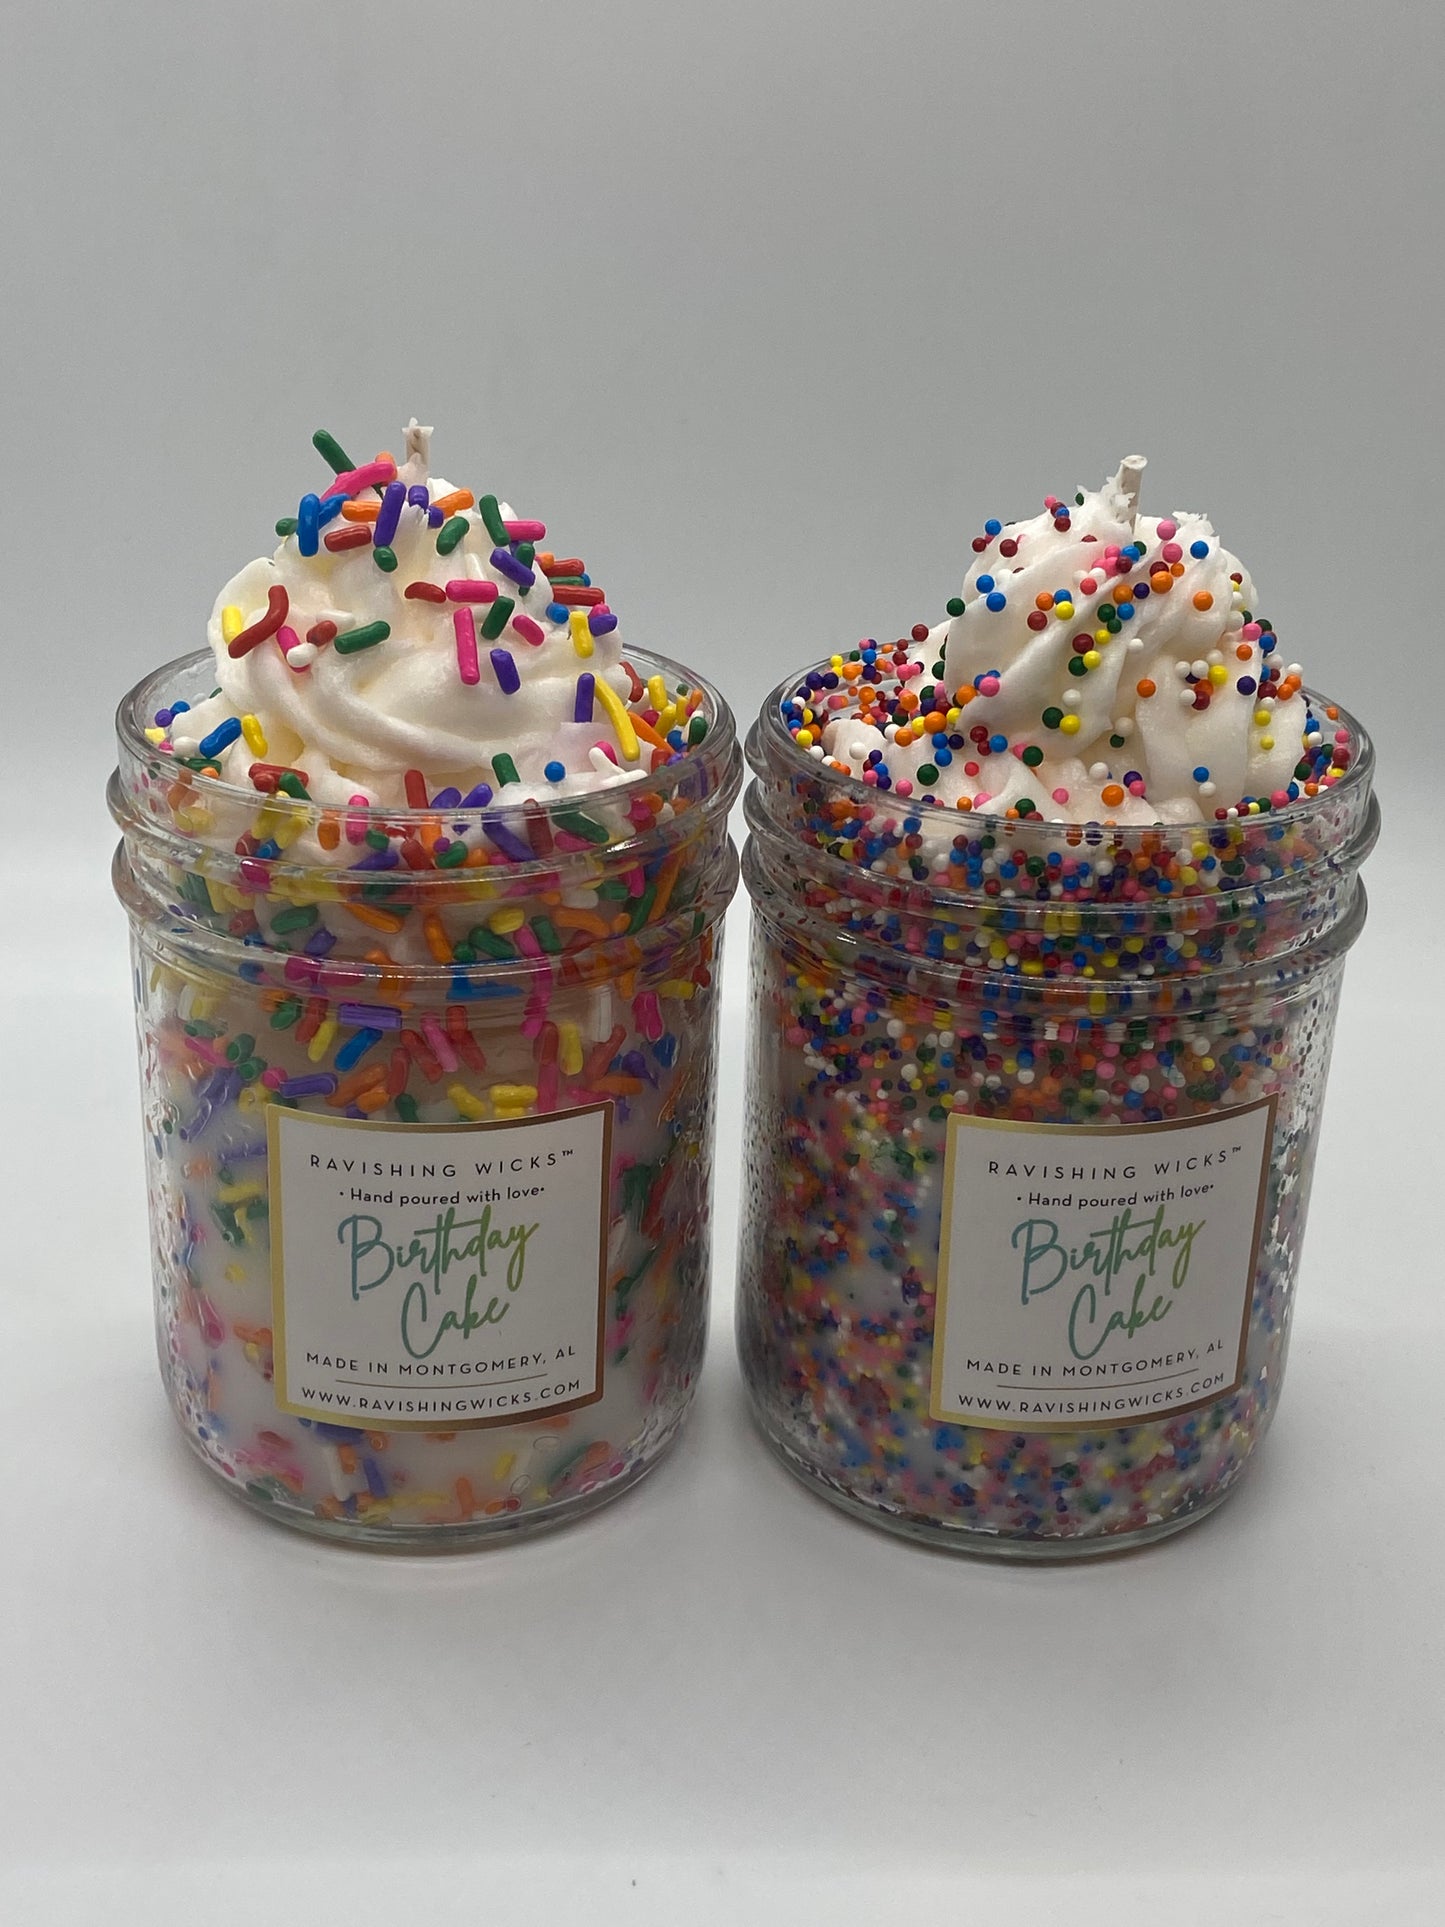 Birthday Cake Whipped Wax Candle - 8 oz